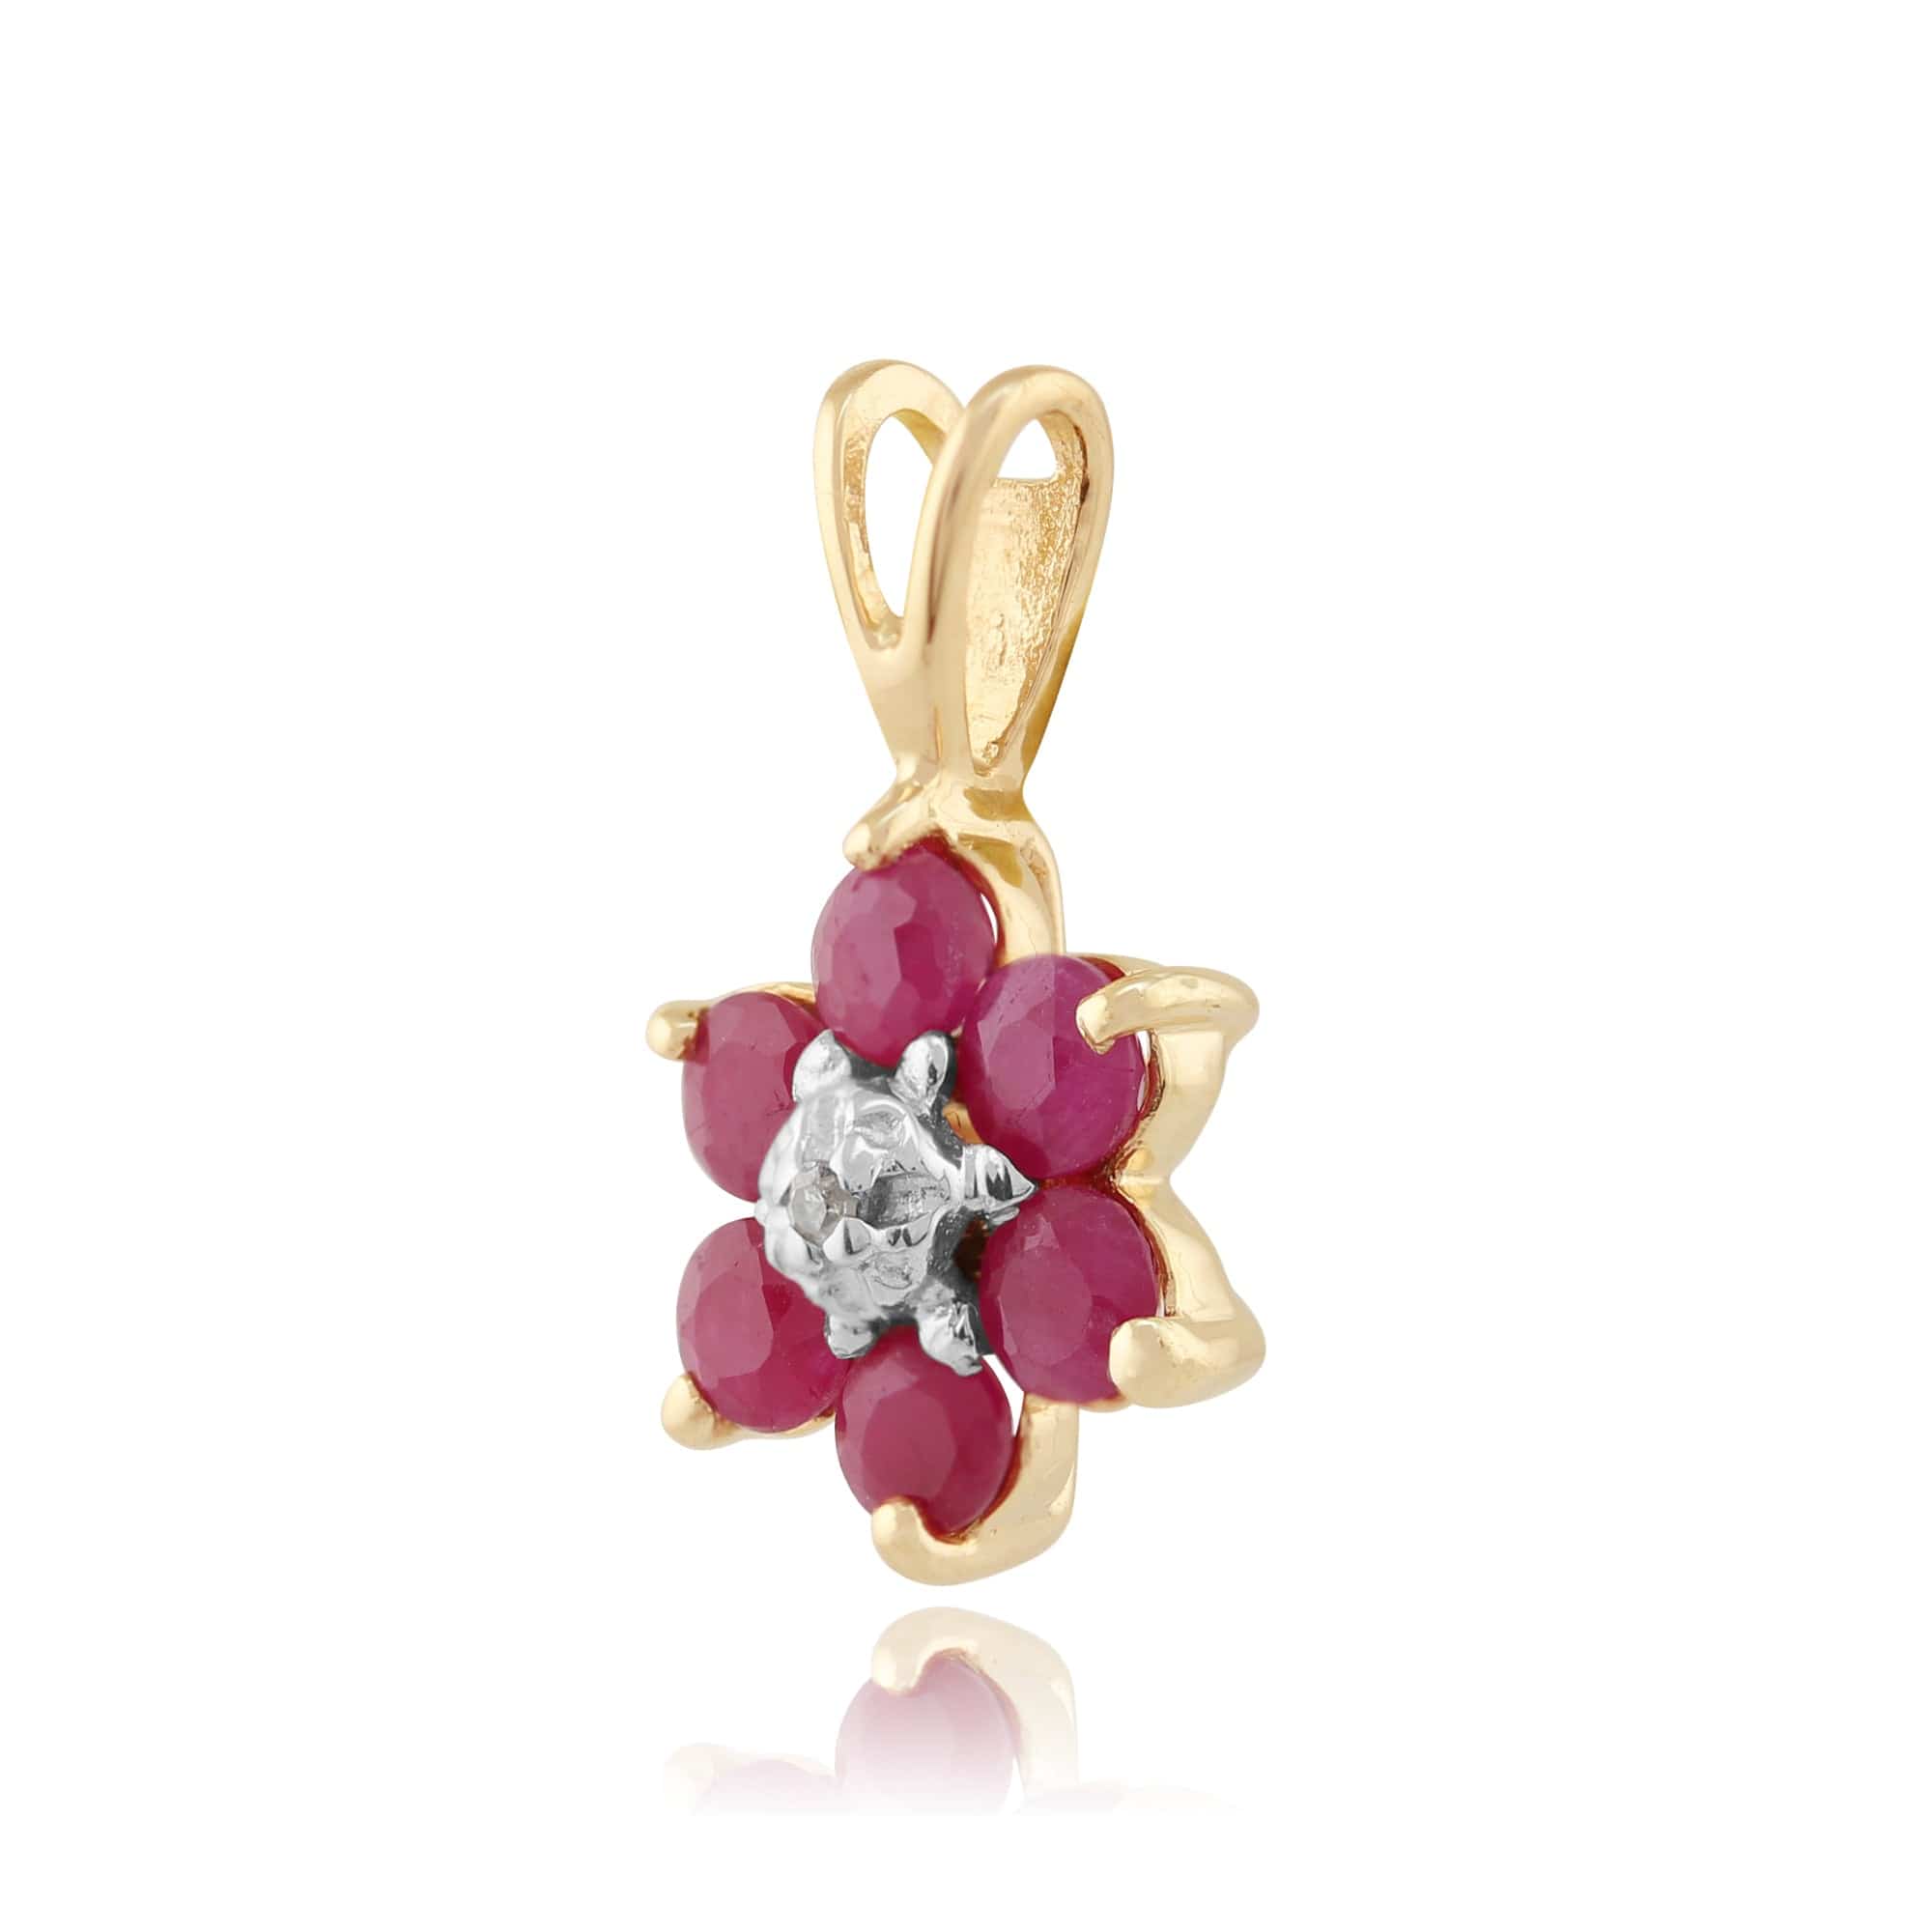 10498-10190 Floral Round Ruby & Diamond Flower Cluster Stud Earrings & Pendant Set in 9ct Yellow Gold 5